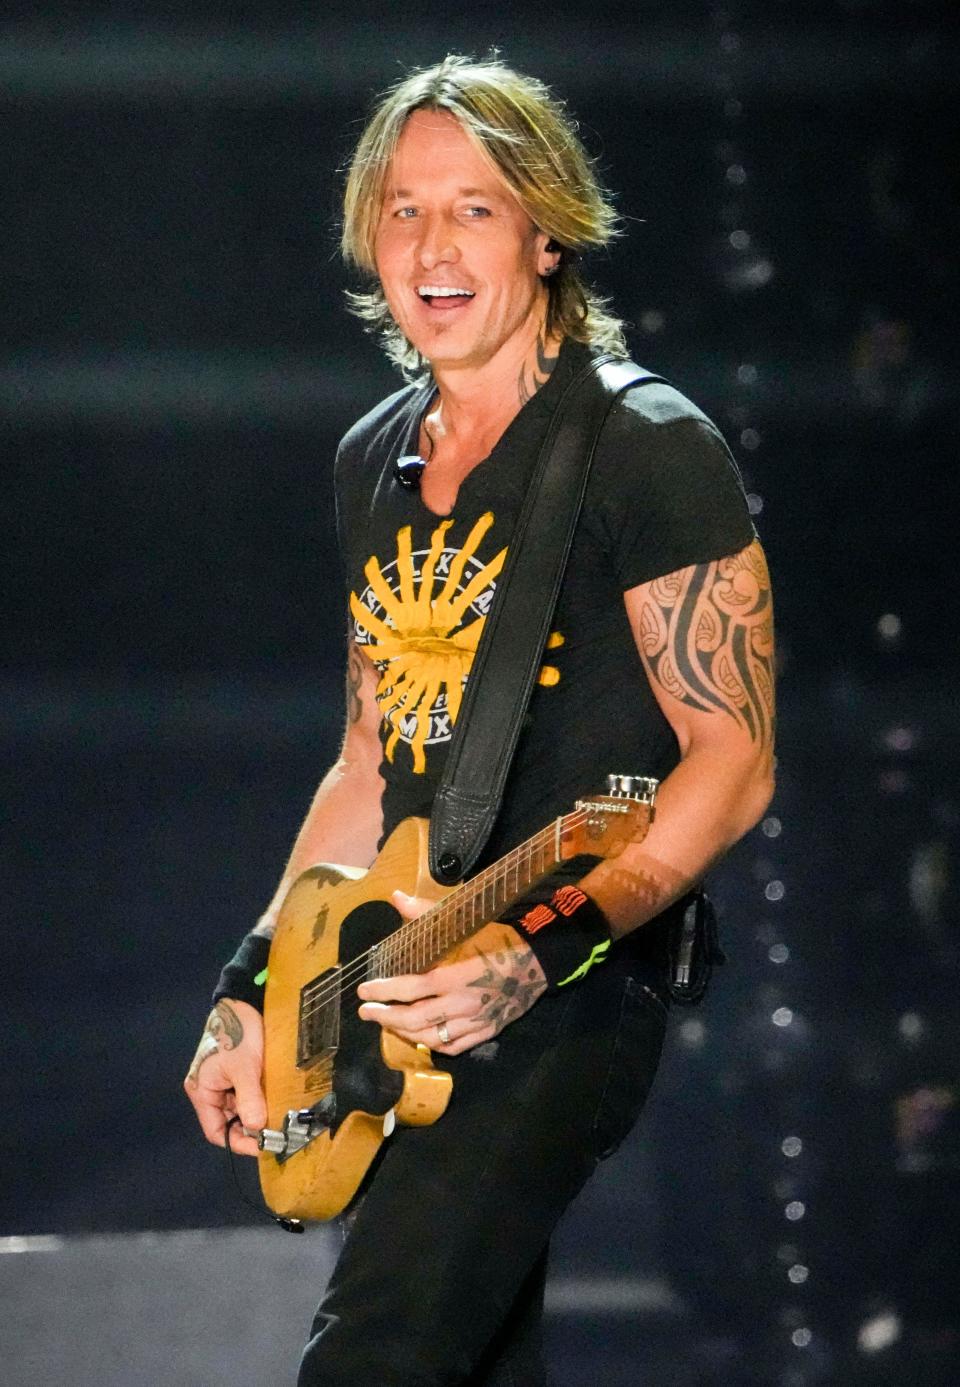 Keith Urban performs at the Iowa State Fair Grandstand on Saturda in Des Moines.